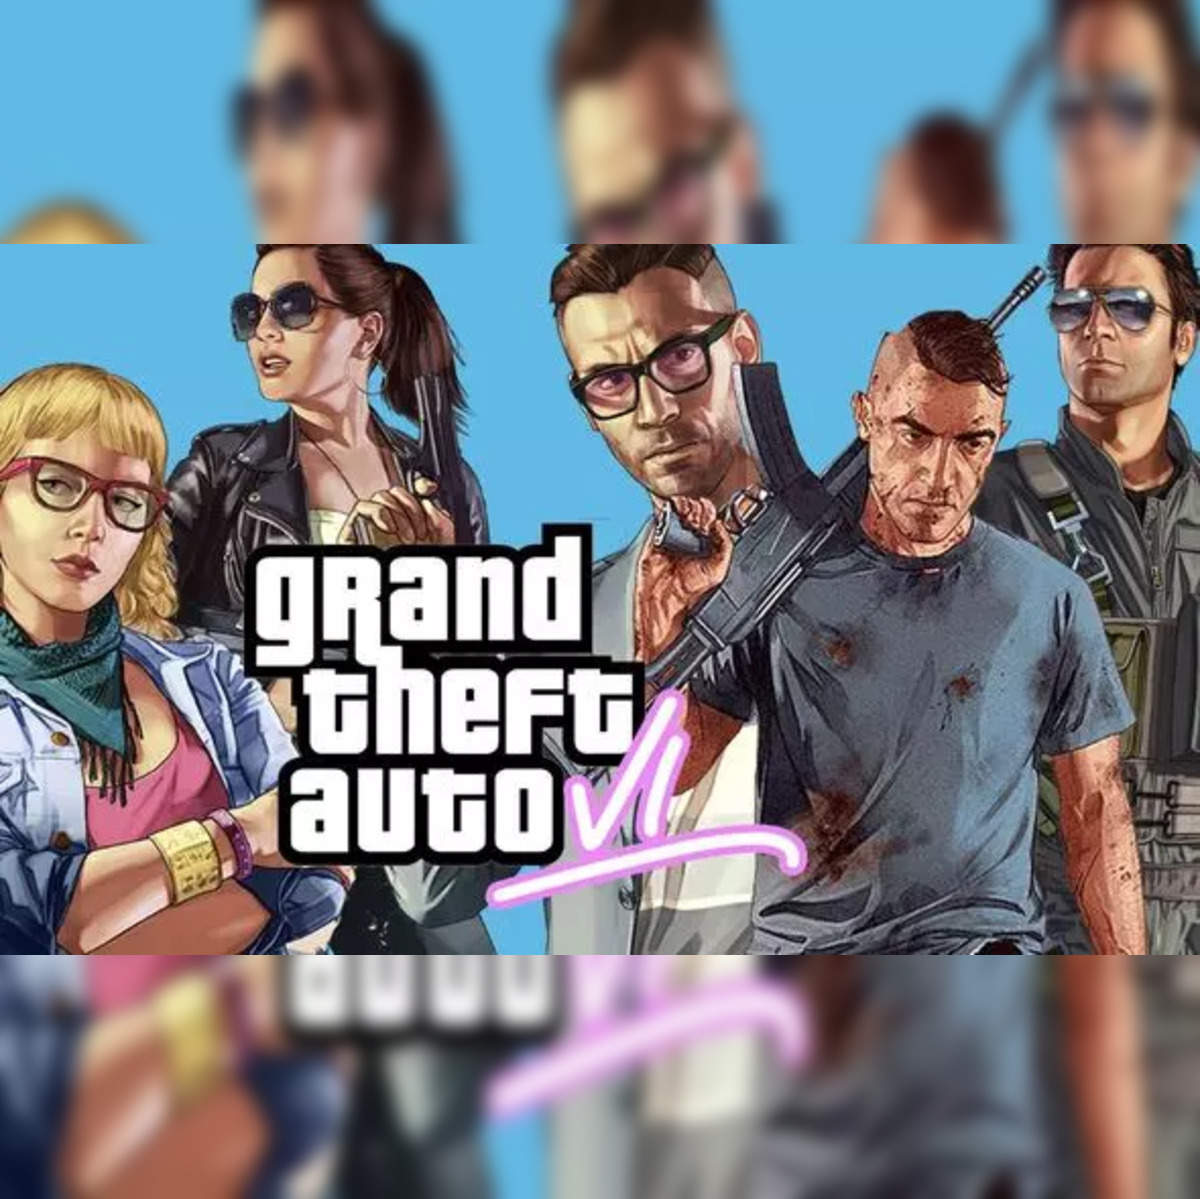 GTA VI trailer likely to drop in December as Rockstar Games completes 25  years - India Today